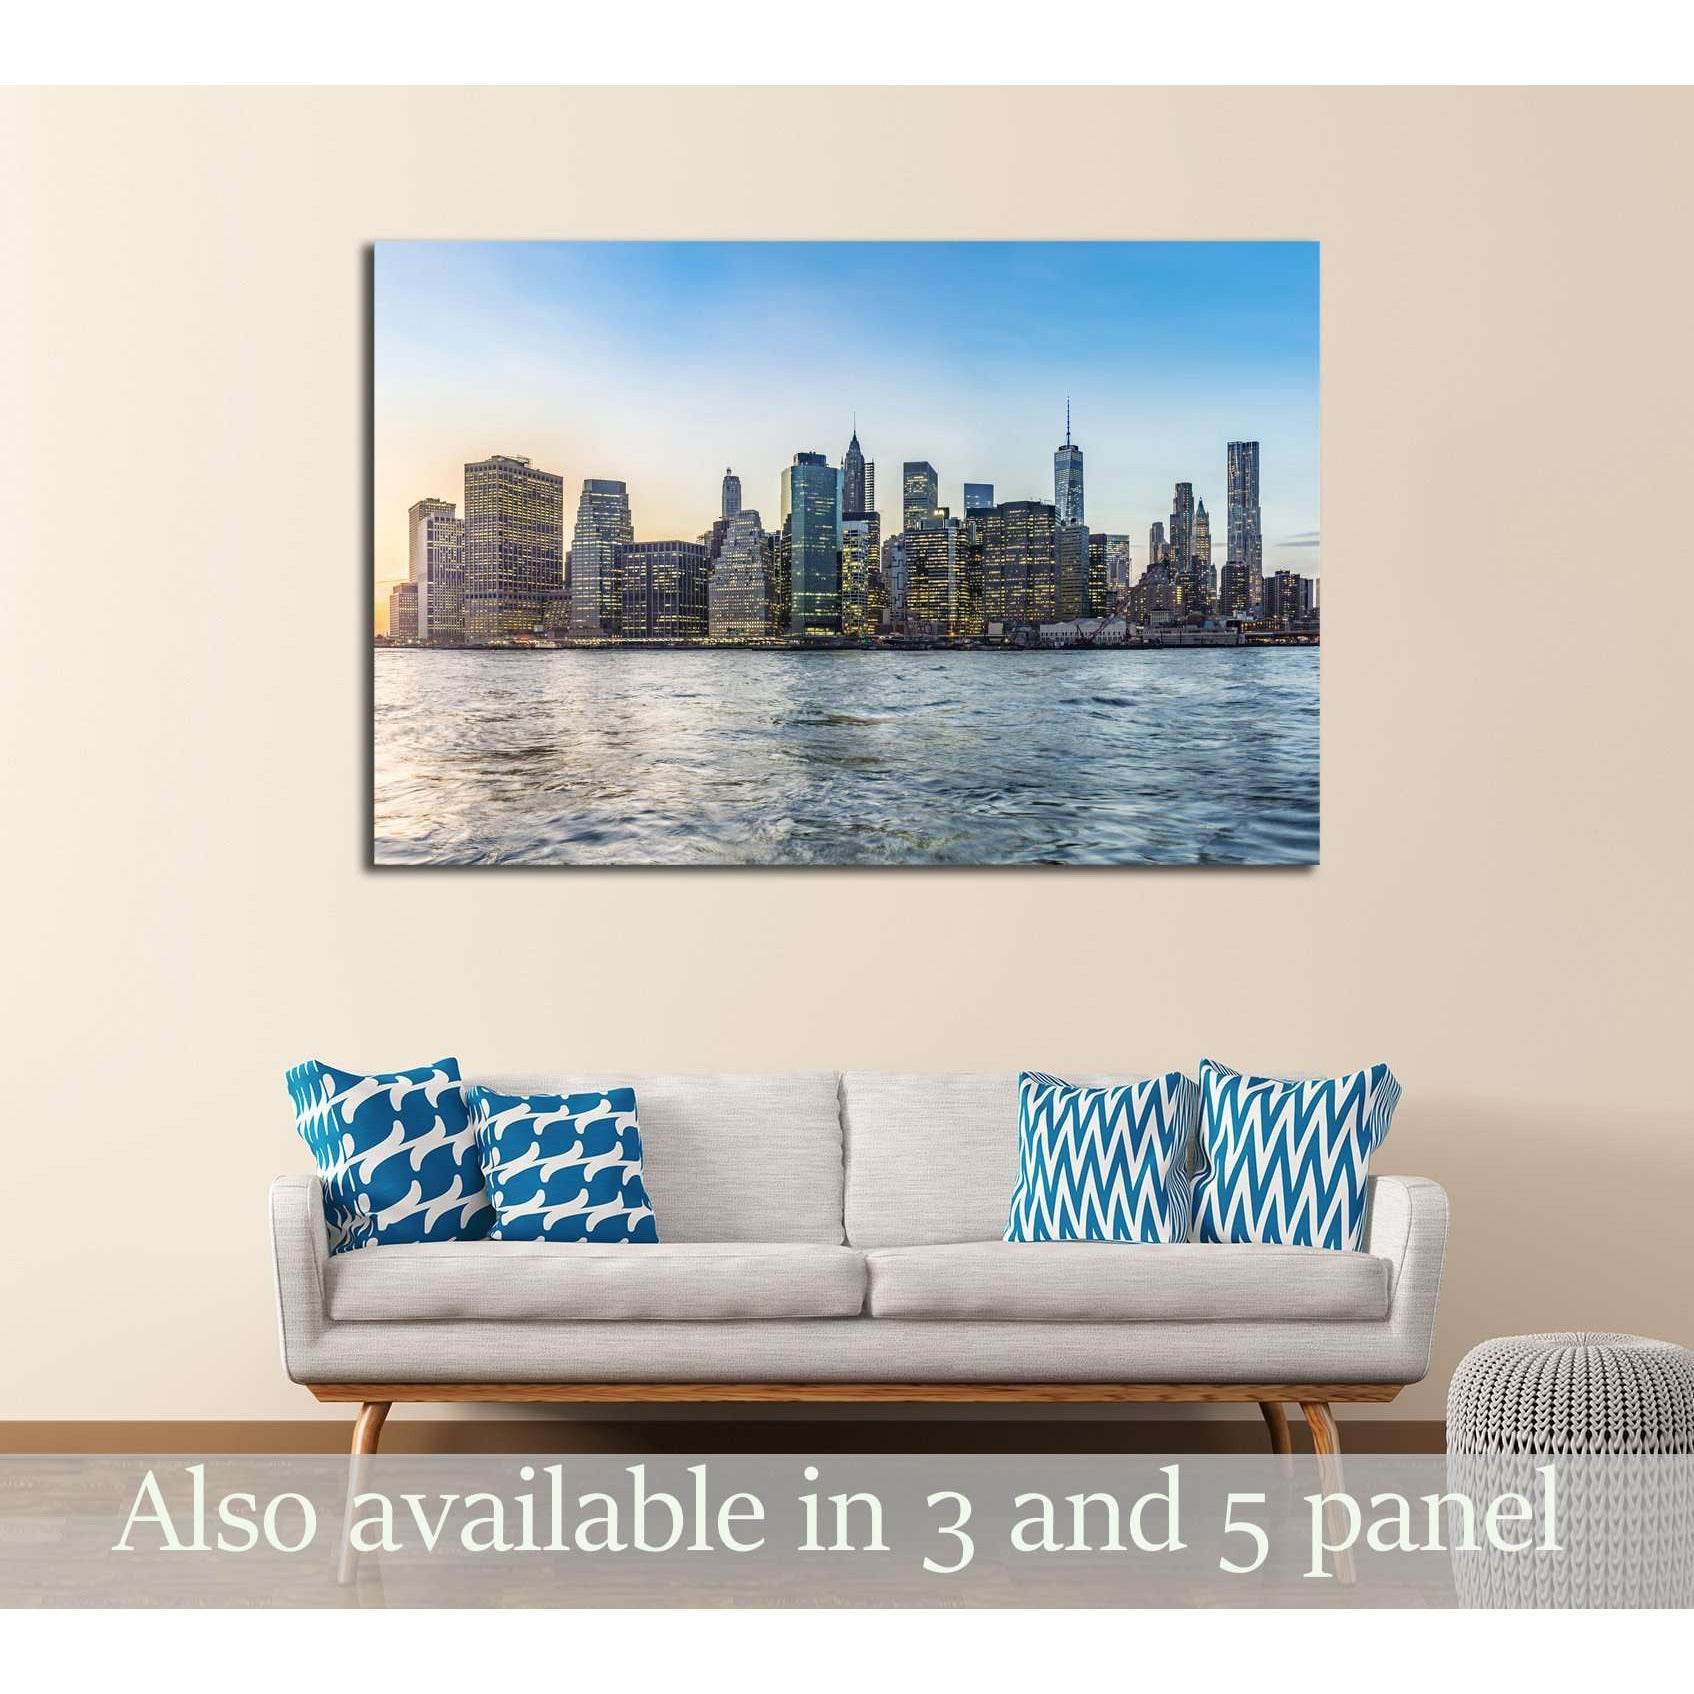 Manhattan Cityscape Canvas PrintDecorate your walls with a stunning Manhattan Cityscape Canvas Art Print from the world's largest art gallery. Choose from thousands of Manhattan Cityscape artworks with various sizing options. Choose your perfect art print